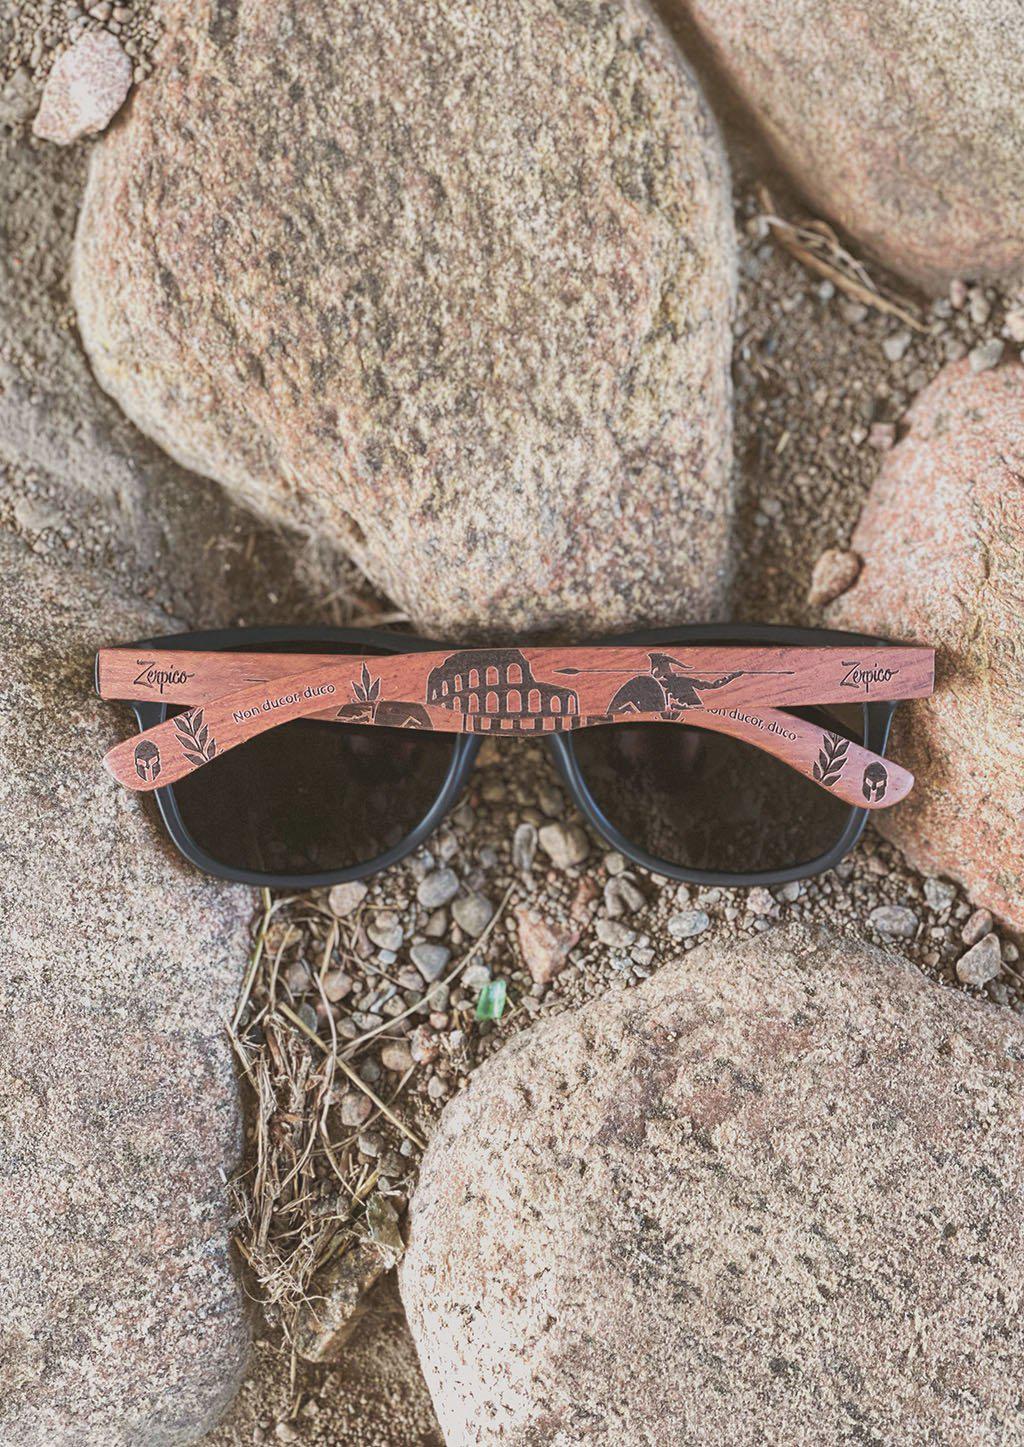 Engraved wooden sunglasses - Gladiator is inspired of the Gladiators from Ancient Rome. Among old stones from ancient times.